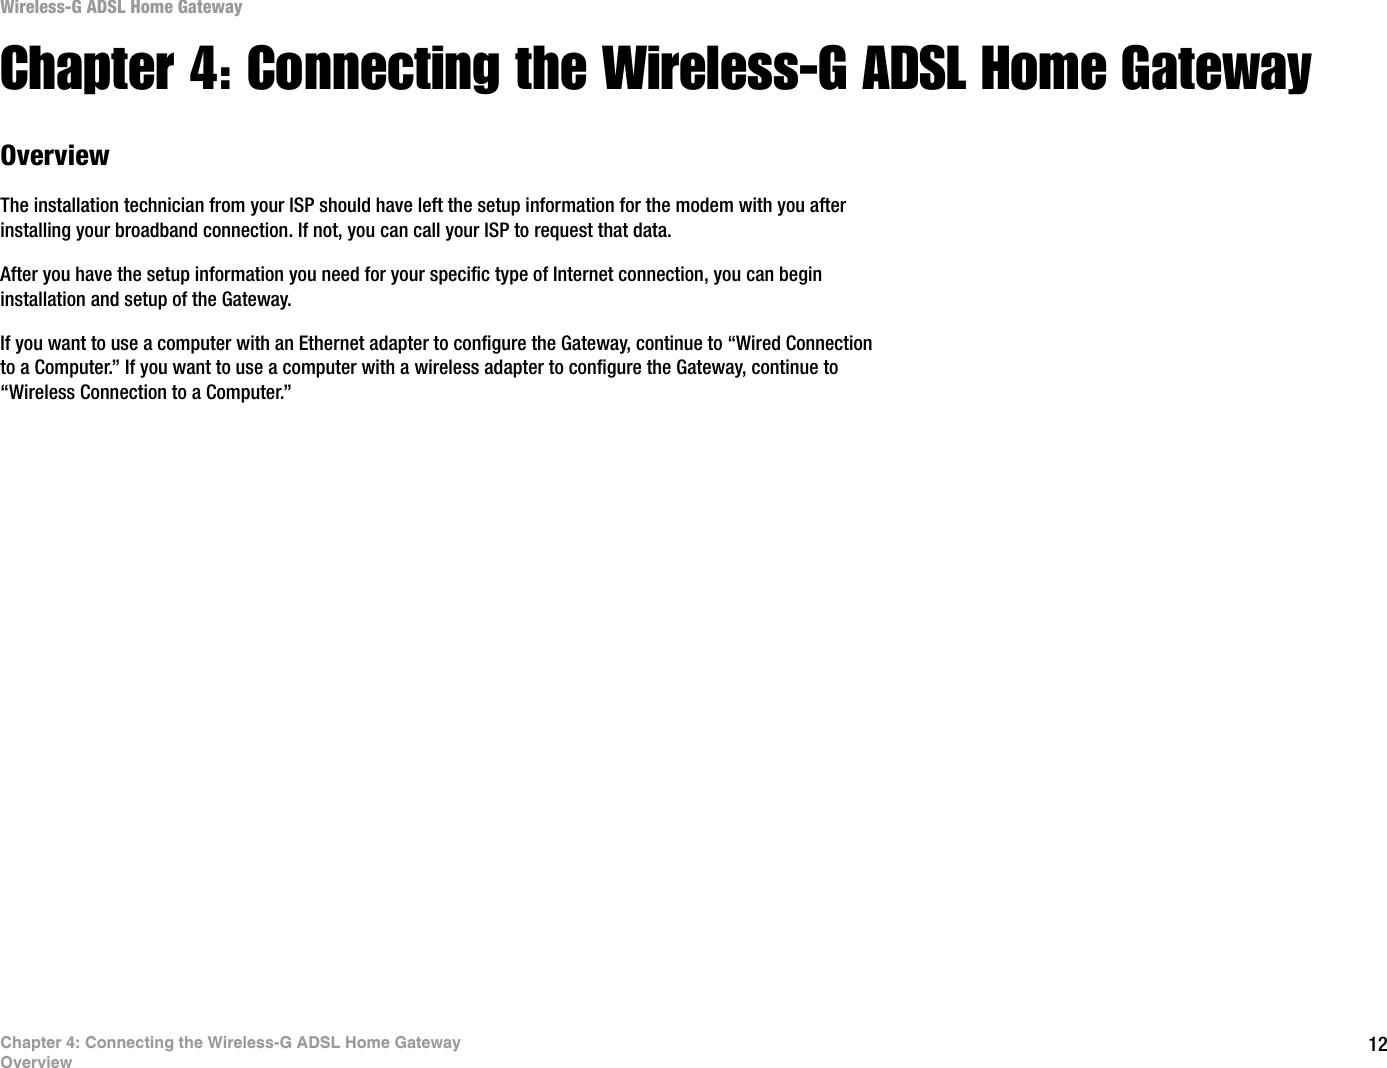 12Chapter 4: Connecting the Wireless-G ADSL Home GatewayOverviewWireless-G ADSL Home GatewayChapter 4: Connecting the Wireless-G ADSL Home GatewayOverviewThe installation technician from your ISP should have left the setup information for the modem with you after installing your broadband connection. If not, you can call your ISP to request that data. After you have the setup information you need for your specific type of Internet connection, you can begin installation and setup of the Gateway.If you want to use a computer with an Ethernet adapter to configure the Gateway, continue to “Wired Connection to a Computer.” If you want to use a computer with a wireless adapter to configure the Gateway, continue to “Wireless Connection to a Computer.”